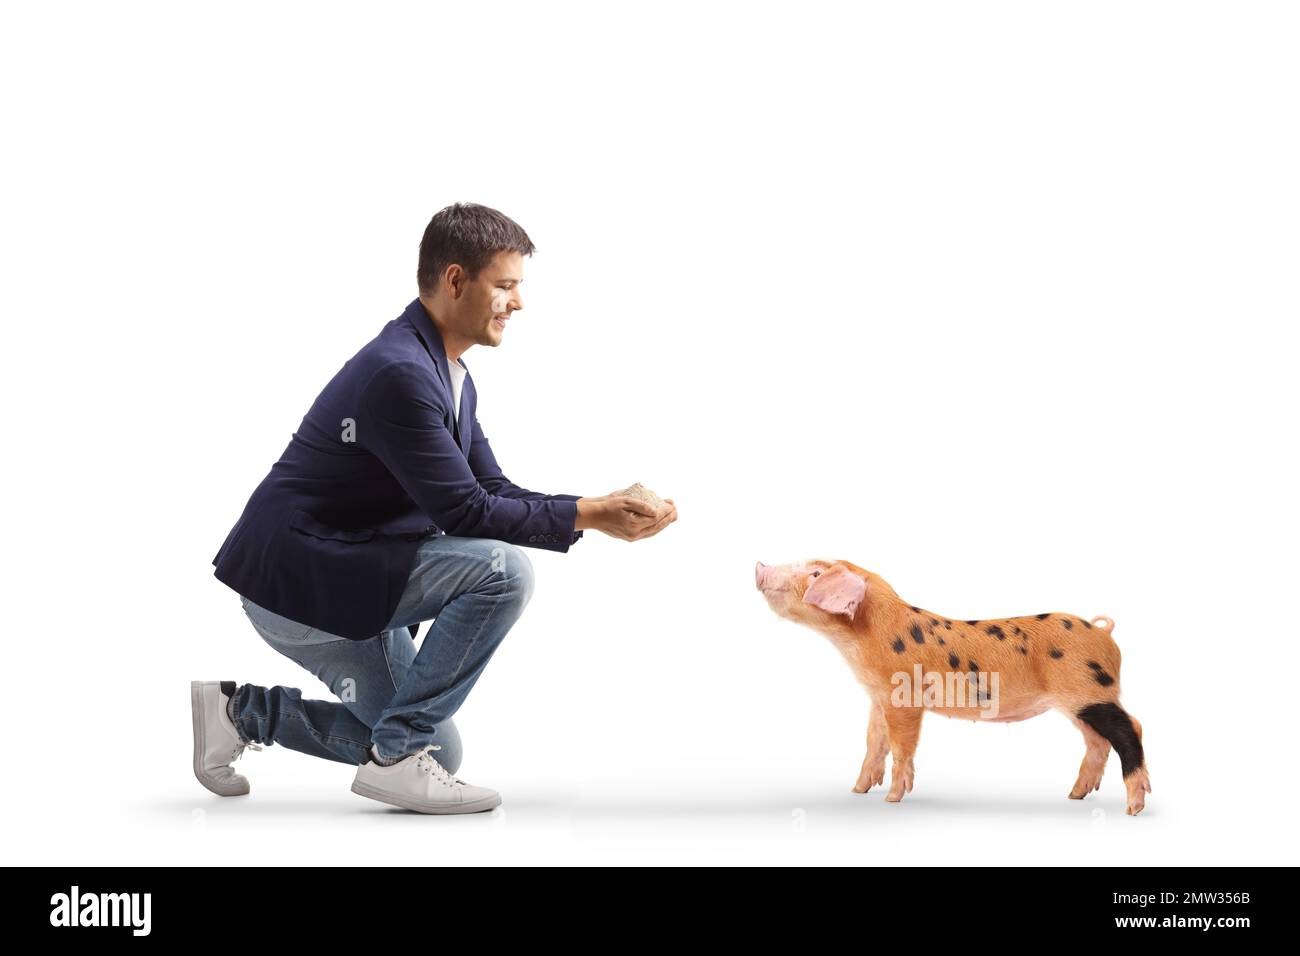 Full length profile shot of a man kneeling and feeding a piglet isolated on white background Stock Photo